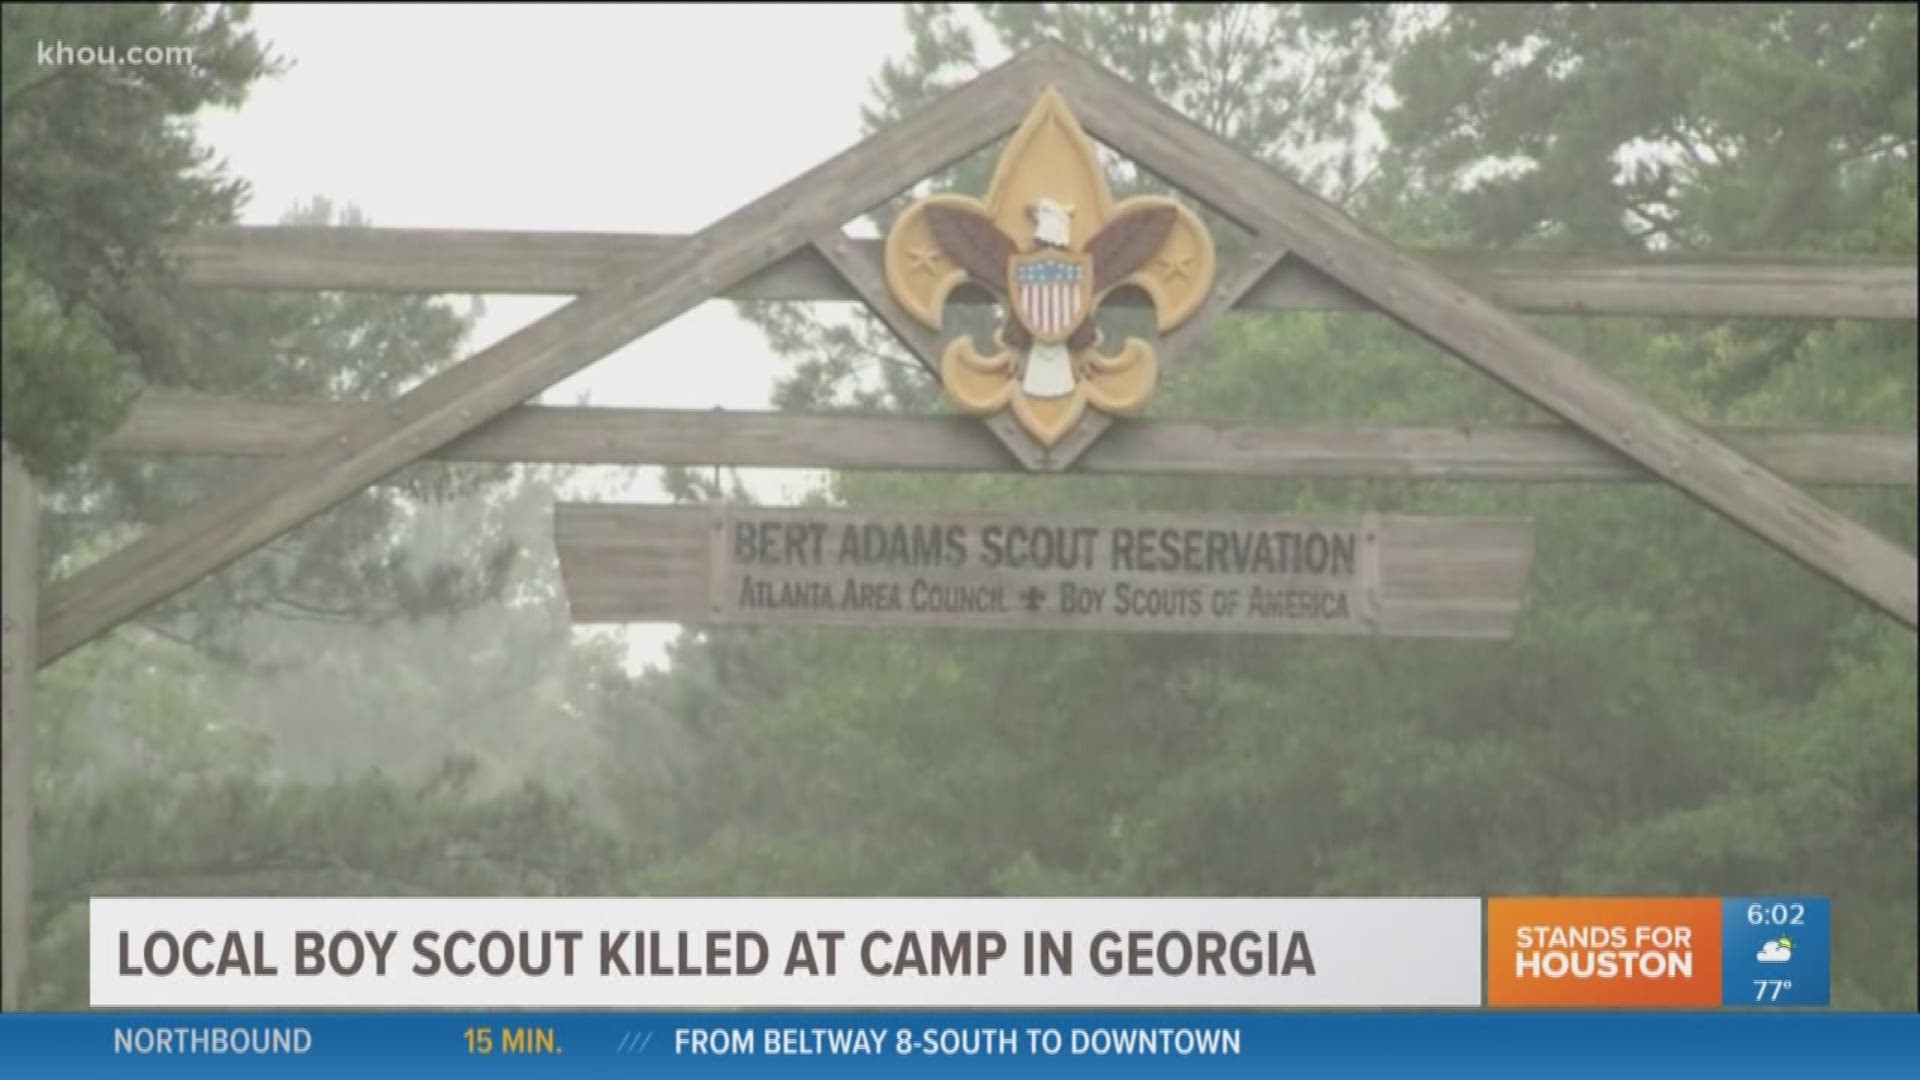 Authorities are investigating after a 14-year-old Boy Scout from the Houston area was killed by a falling tree on campgrounds in Georgia Monday evening.